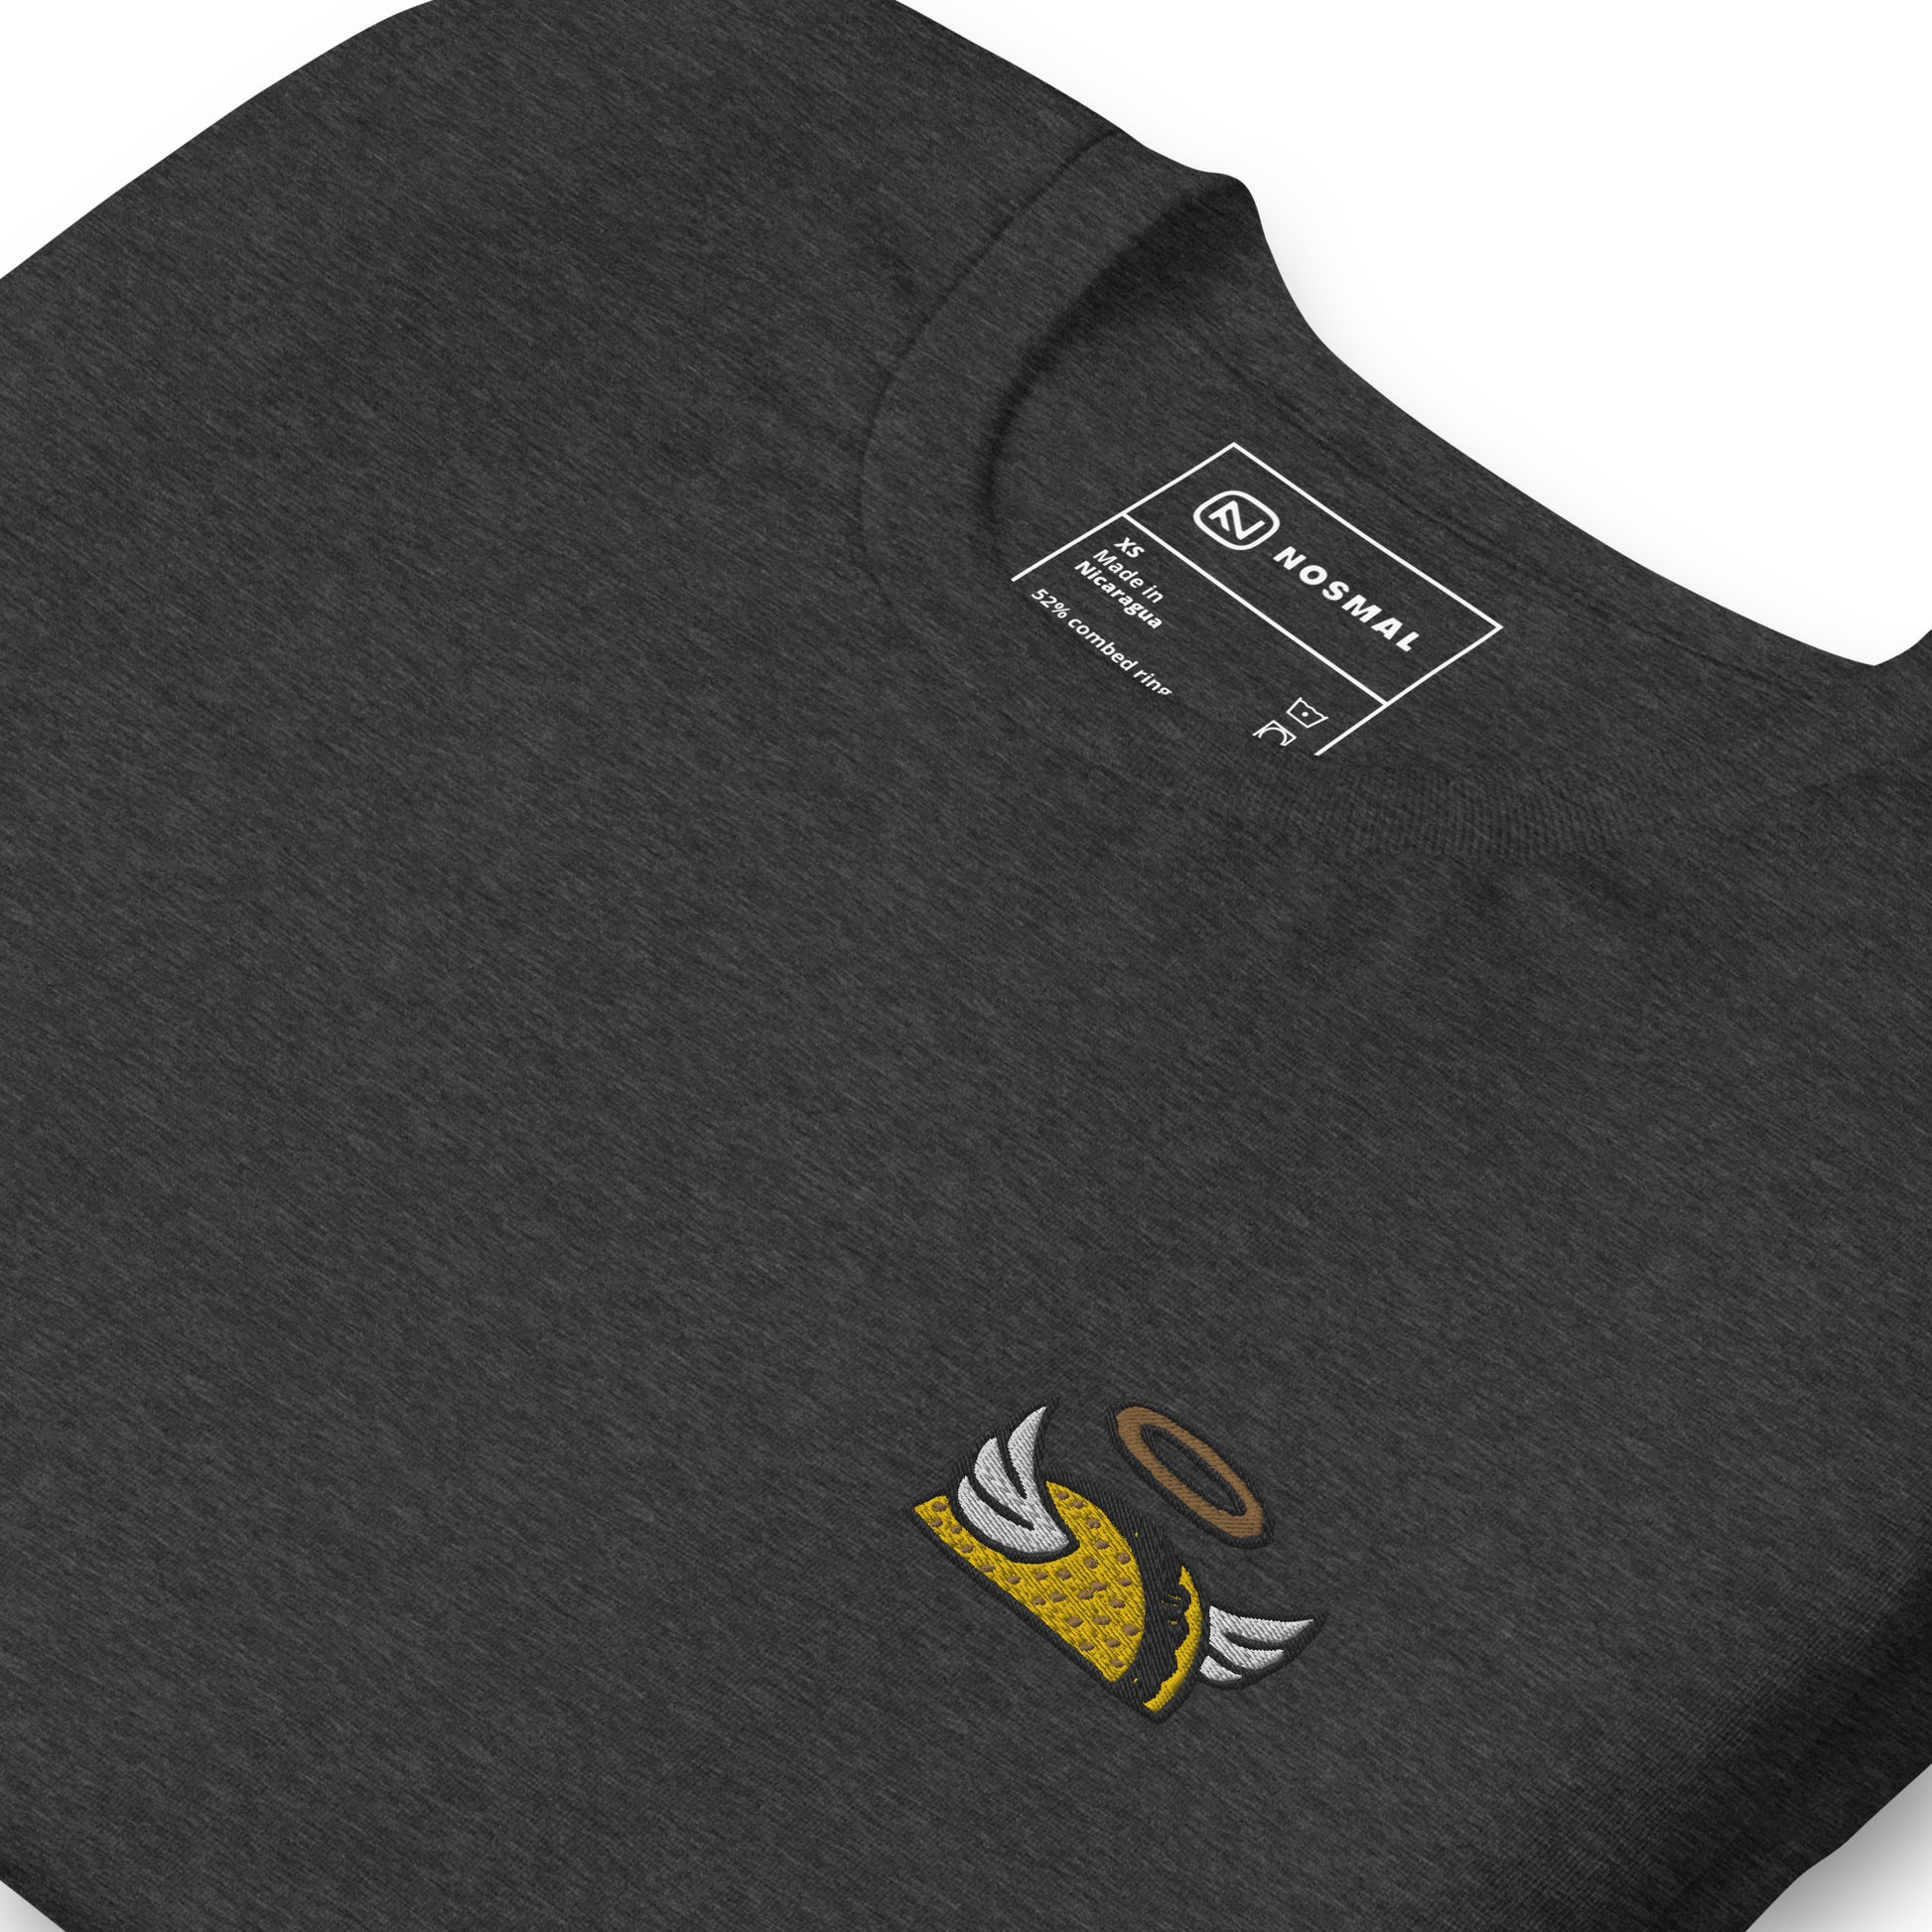 Angled close up holy taco club embroidered design on heather dark grey unisex t-shirt.